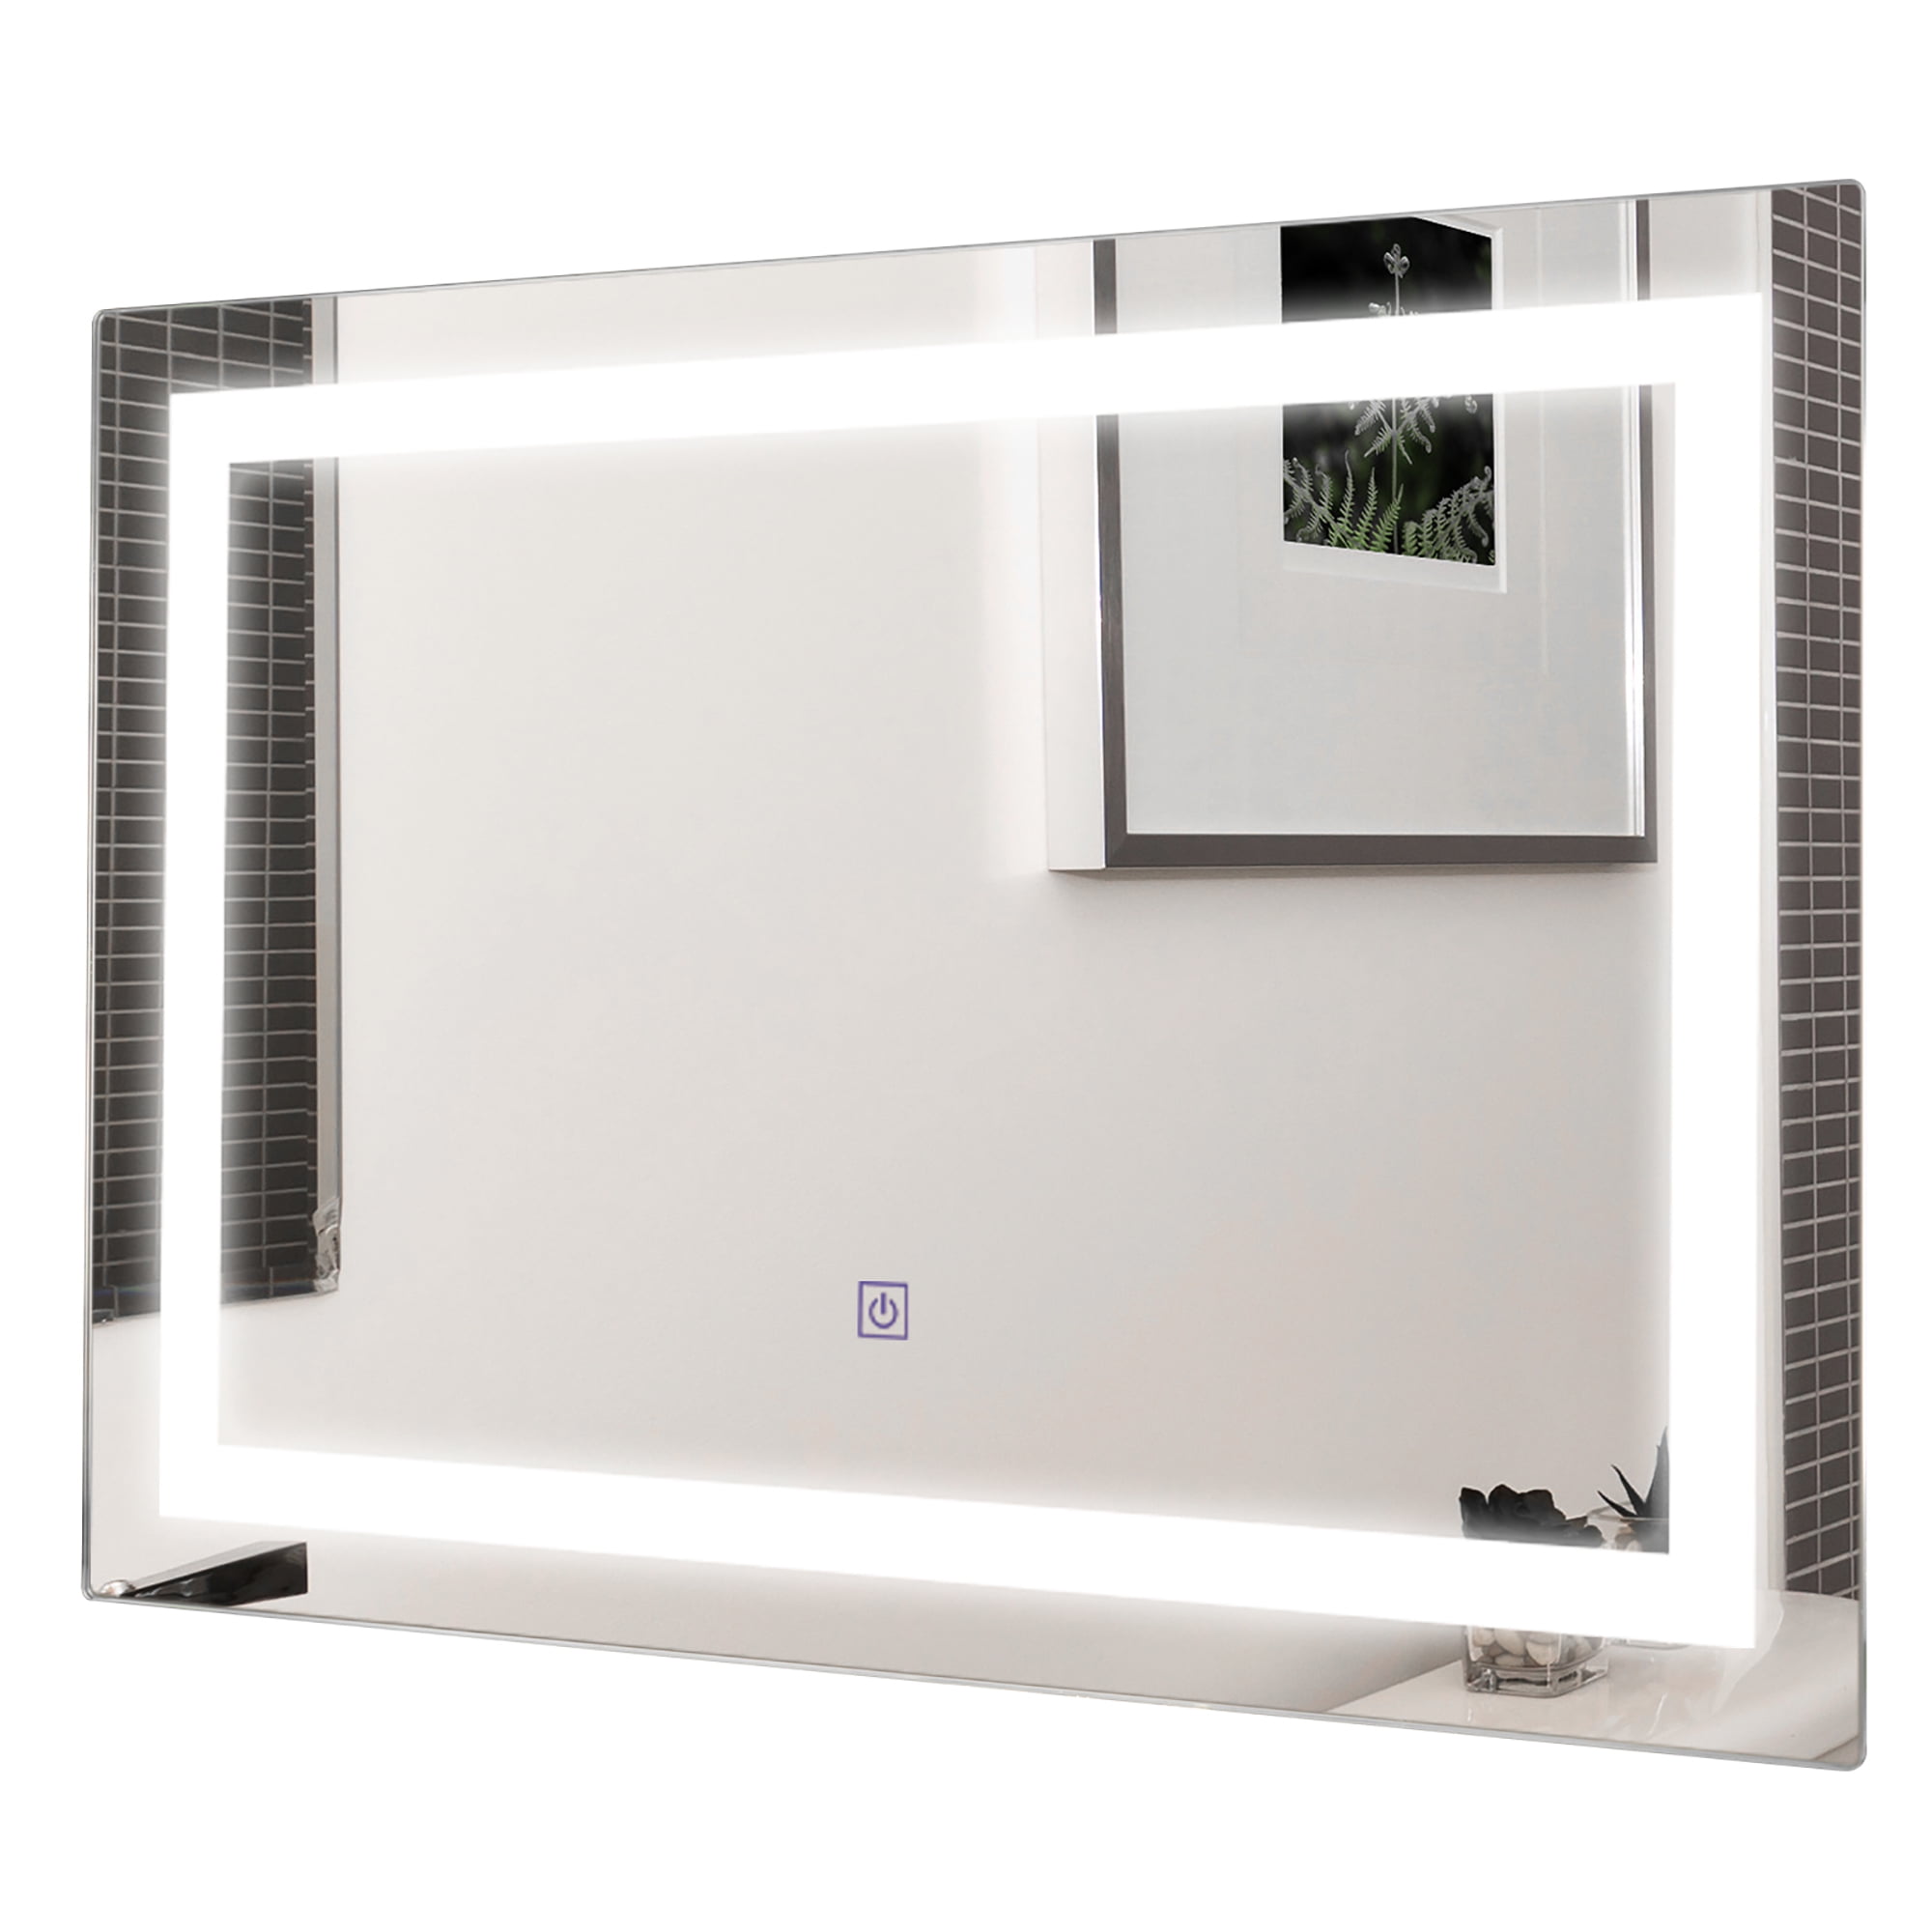 27.5" LED Light Wall-Mounted Rect Bathroom Make Up Vanity Mirror w/ Touch Sensor 